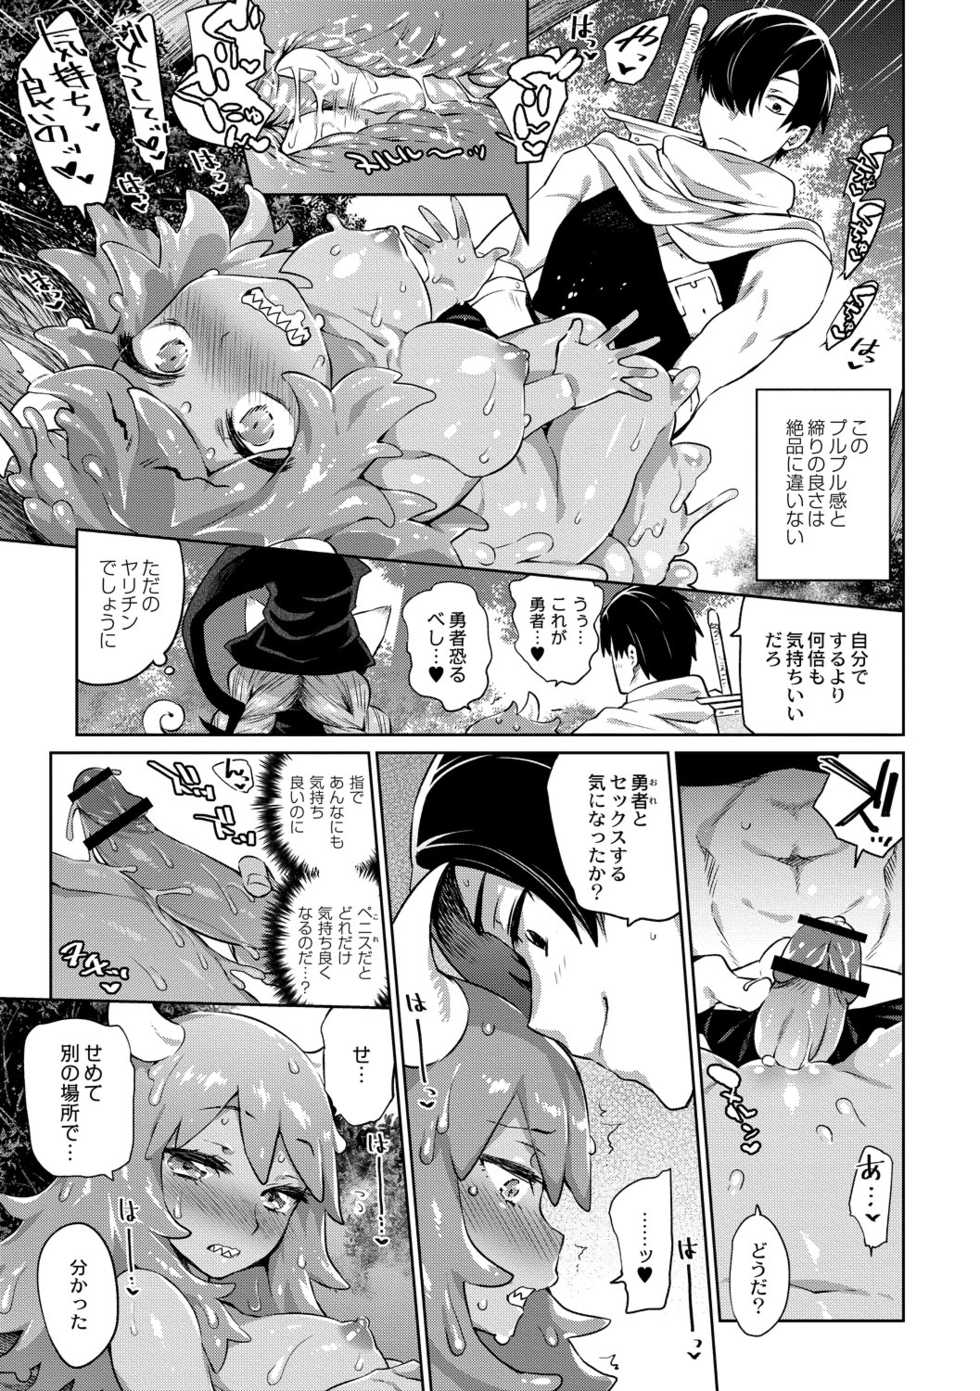 [Mizone] Monster Musume no Otoshikata - How to Corrupt a Monster Girl [Digital] - Page 20